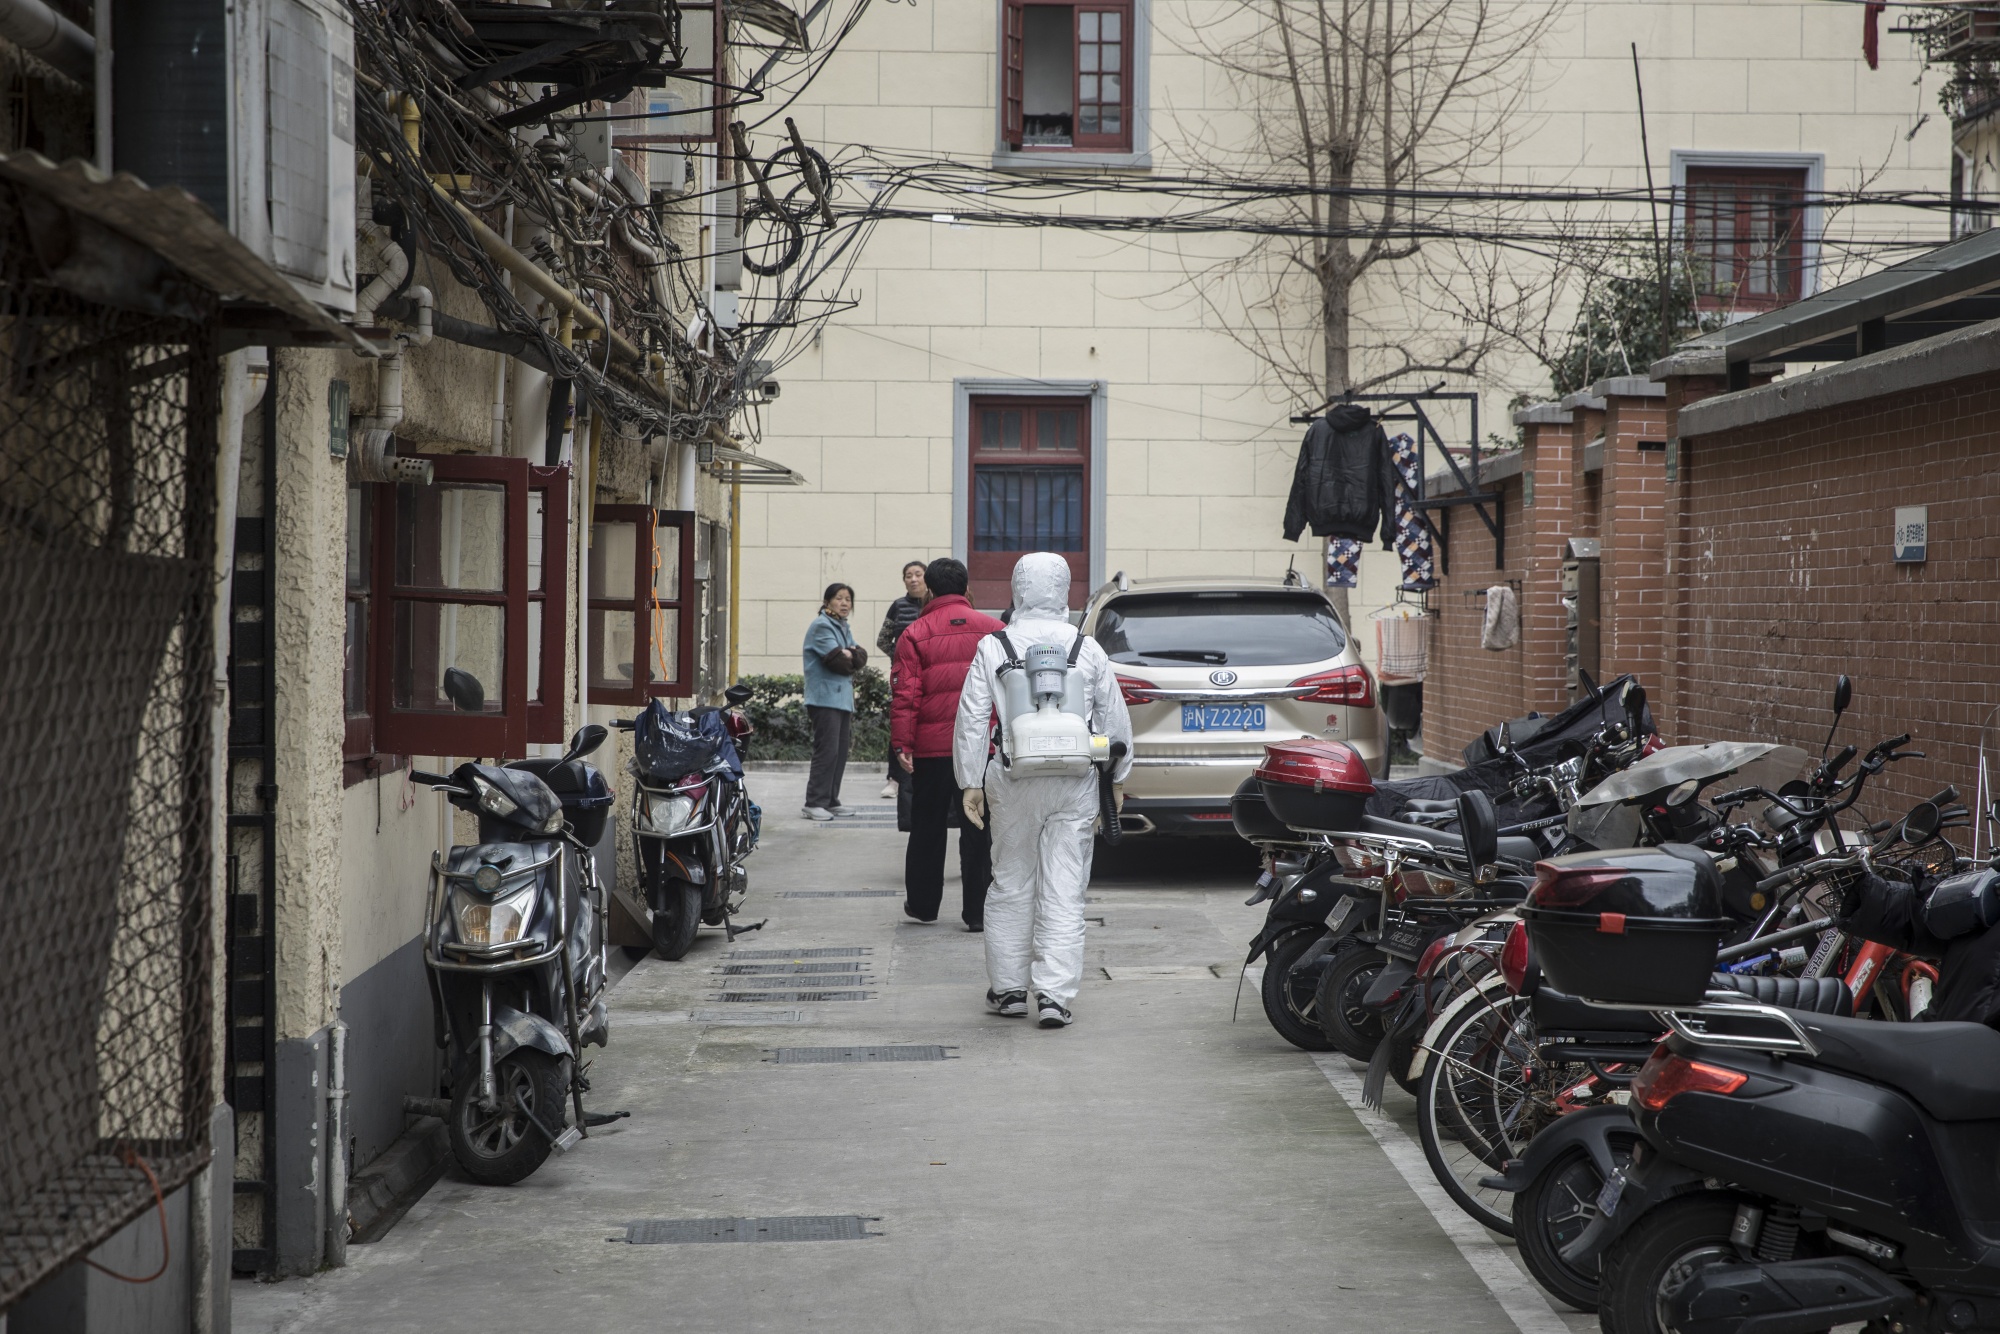 A man wearing a protective suit and carrying a backpack of disinfectant walks through a neighborhood in Shanghai on Feb. 5.